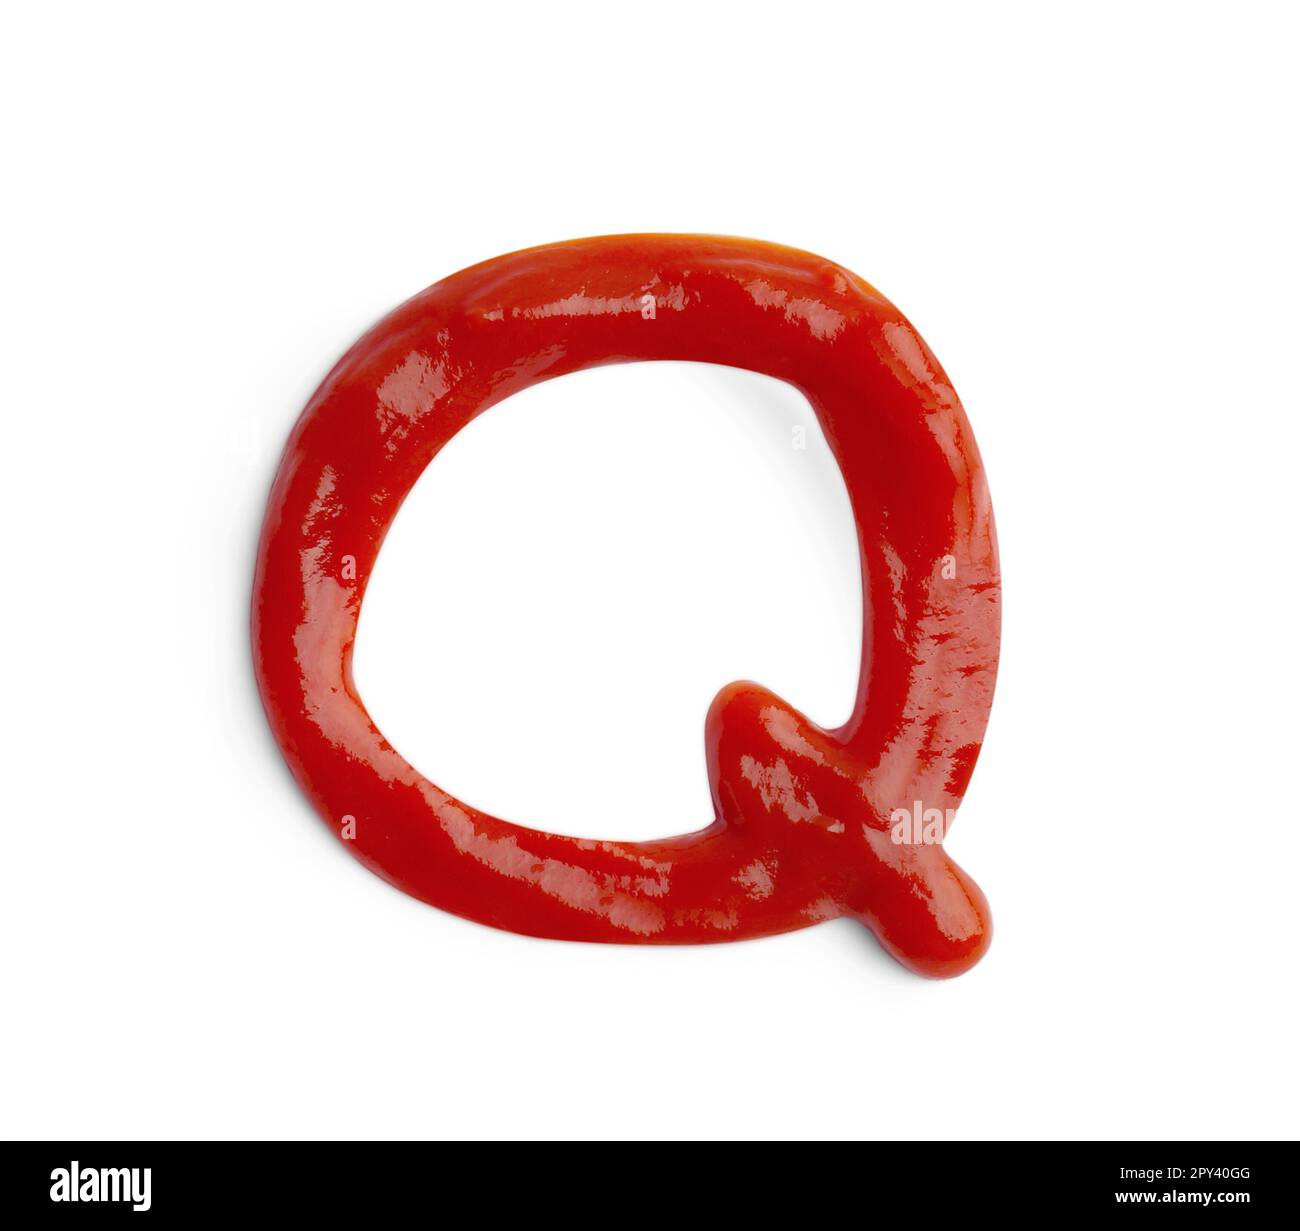 Letter Q written with ketchup on white background Stock Photo